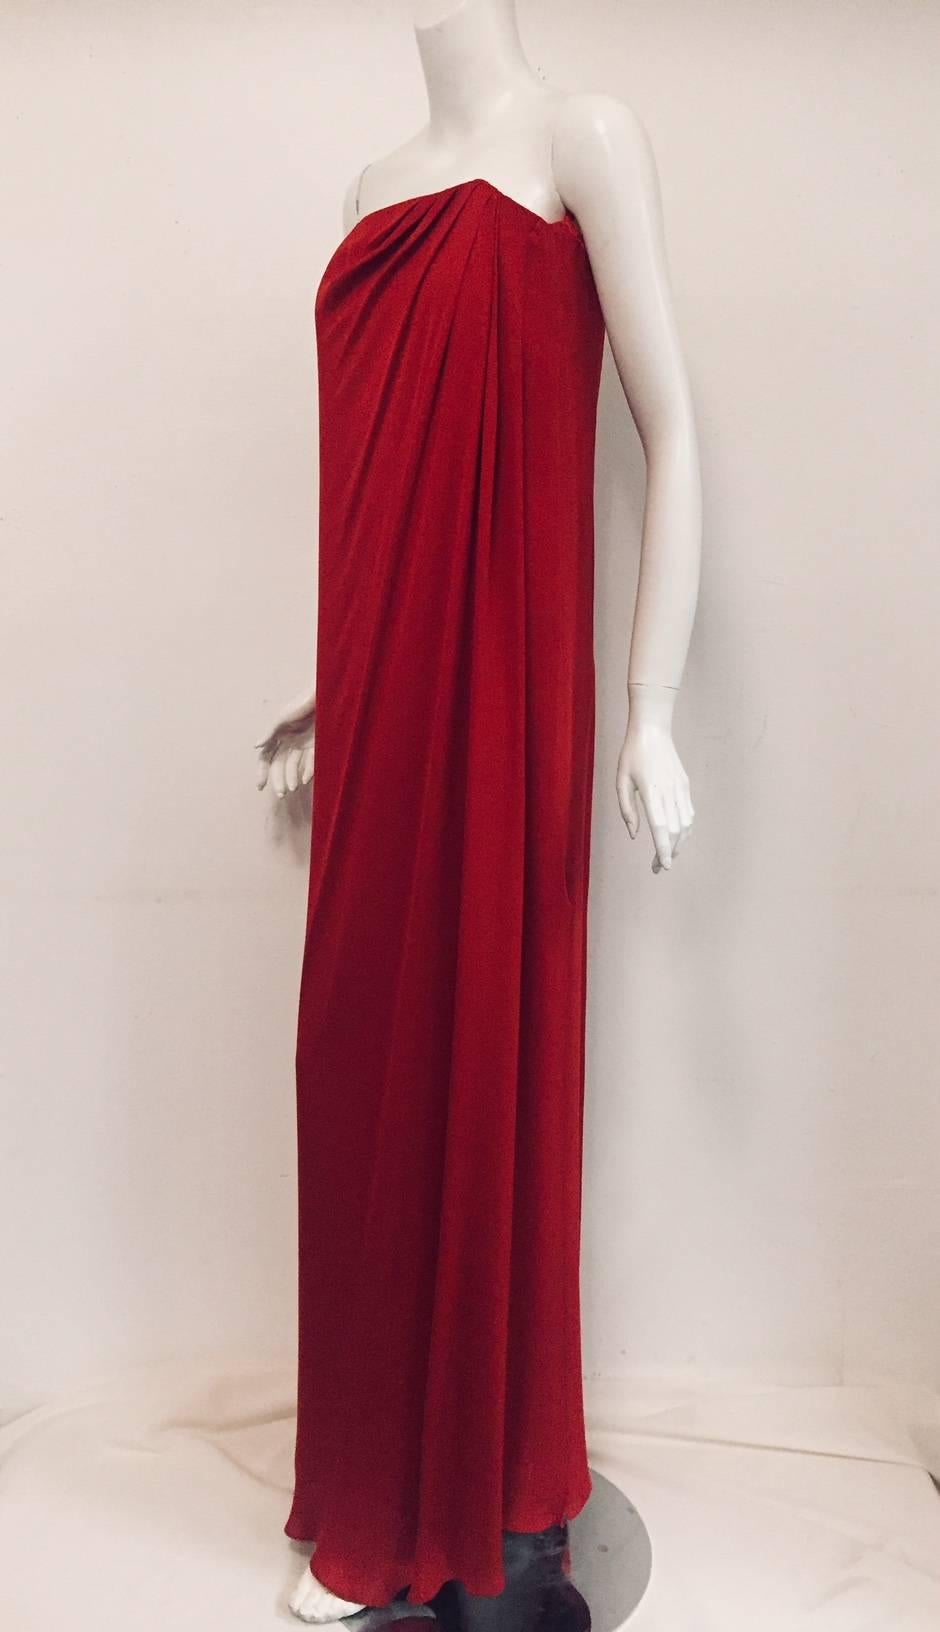 Since Monique Lhuillier established her eponymous fashion line she has become a favorite of New York socialites and Hollywood celebrities alike.  This Ravishing Red Strapless Goddess Gown is Awards Season Ready!  Features 2 ultra-luxurious layers of